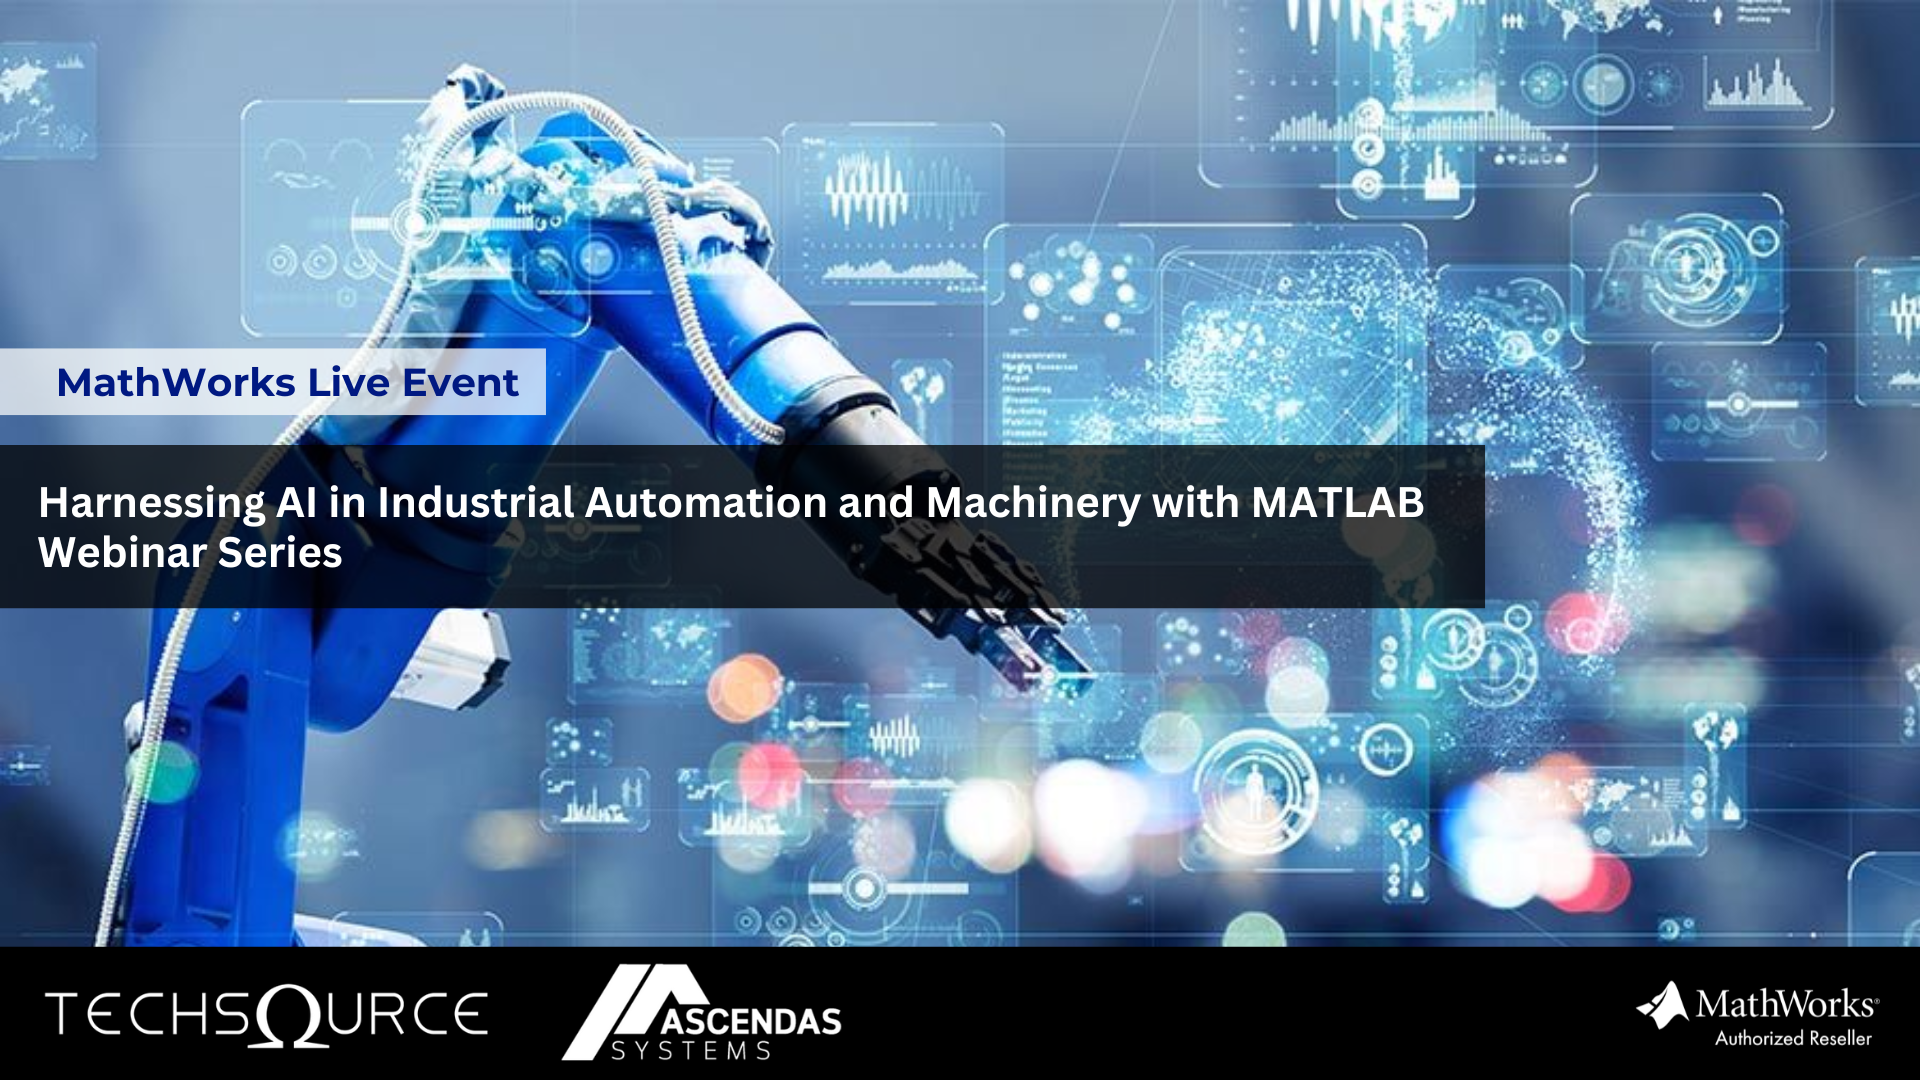 Exclusive Invitation to Harnessing AI in Industrial Automation and Machinery with MATLAB Webinar Series